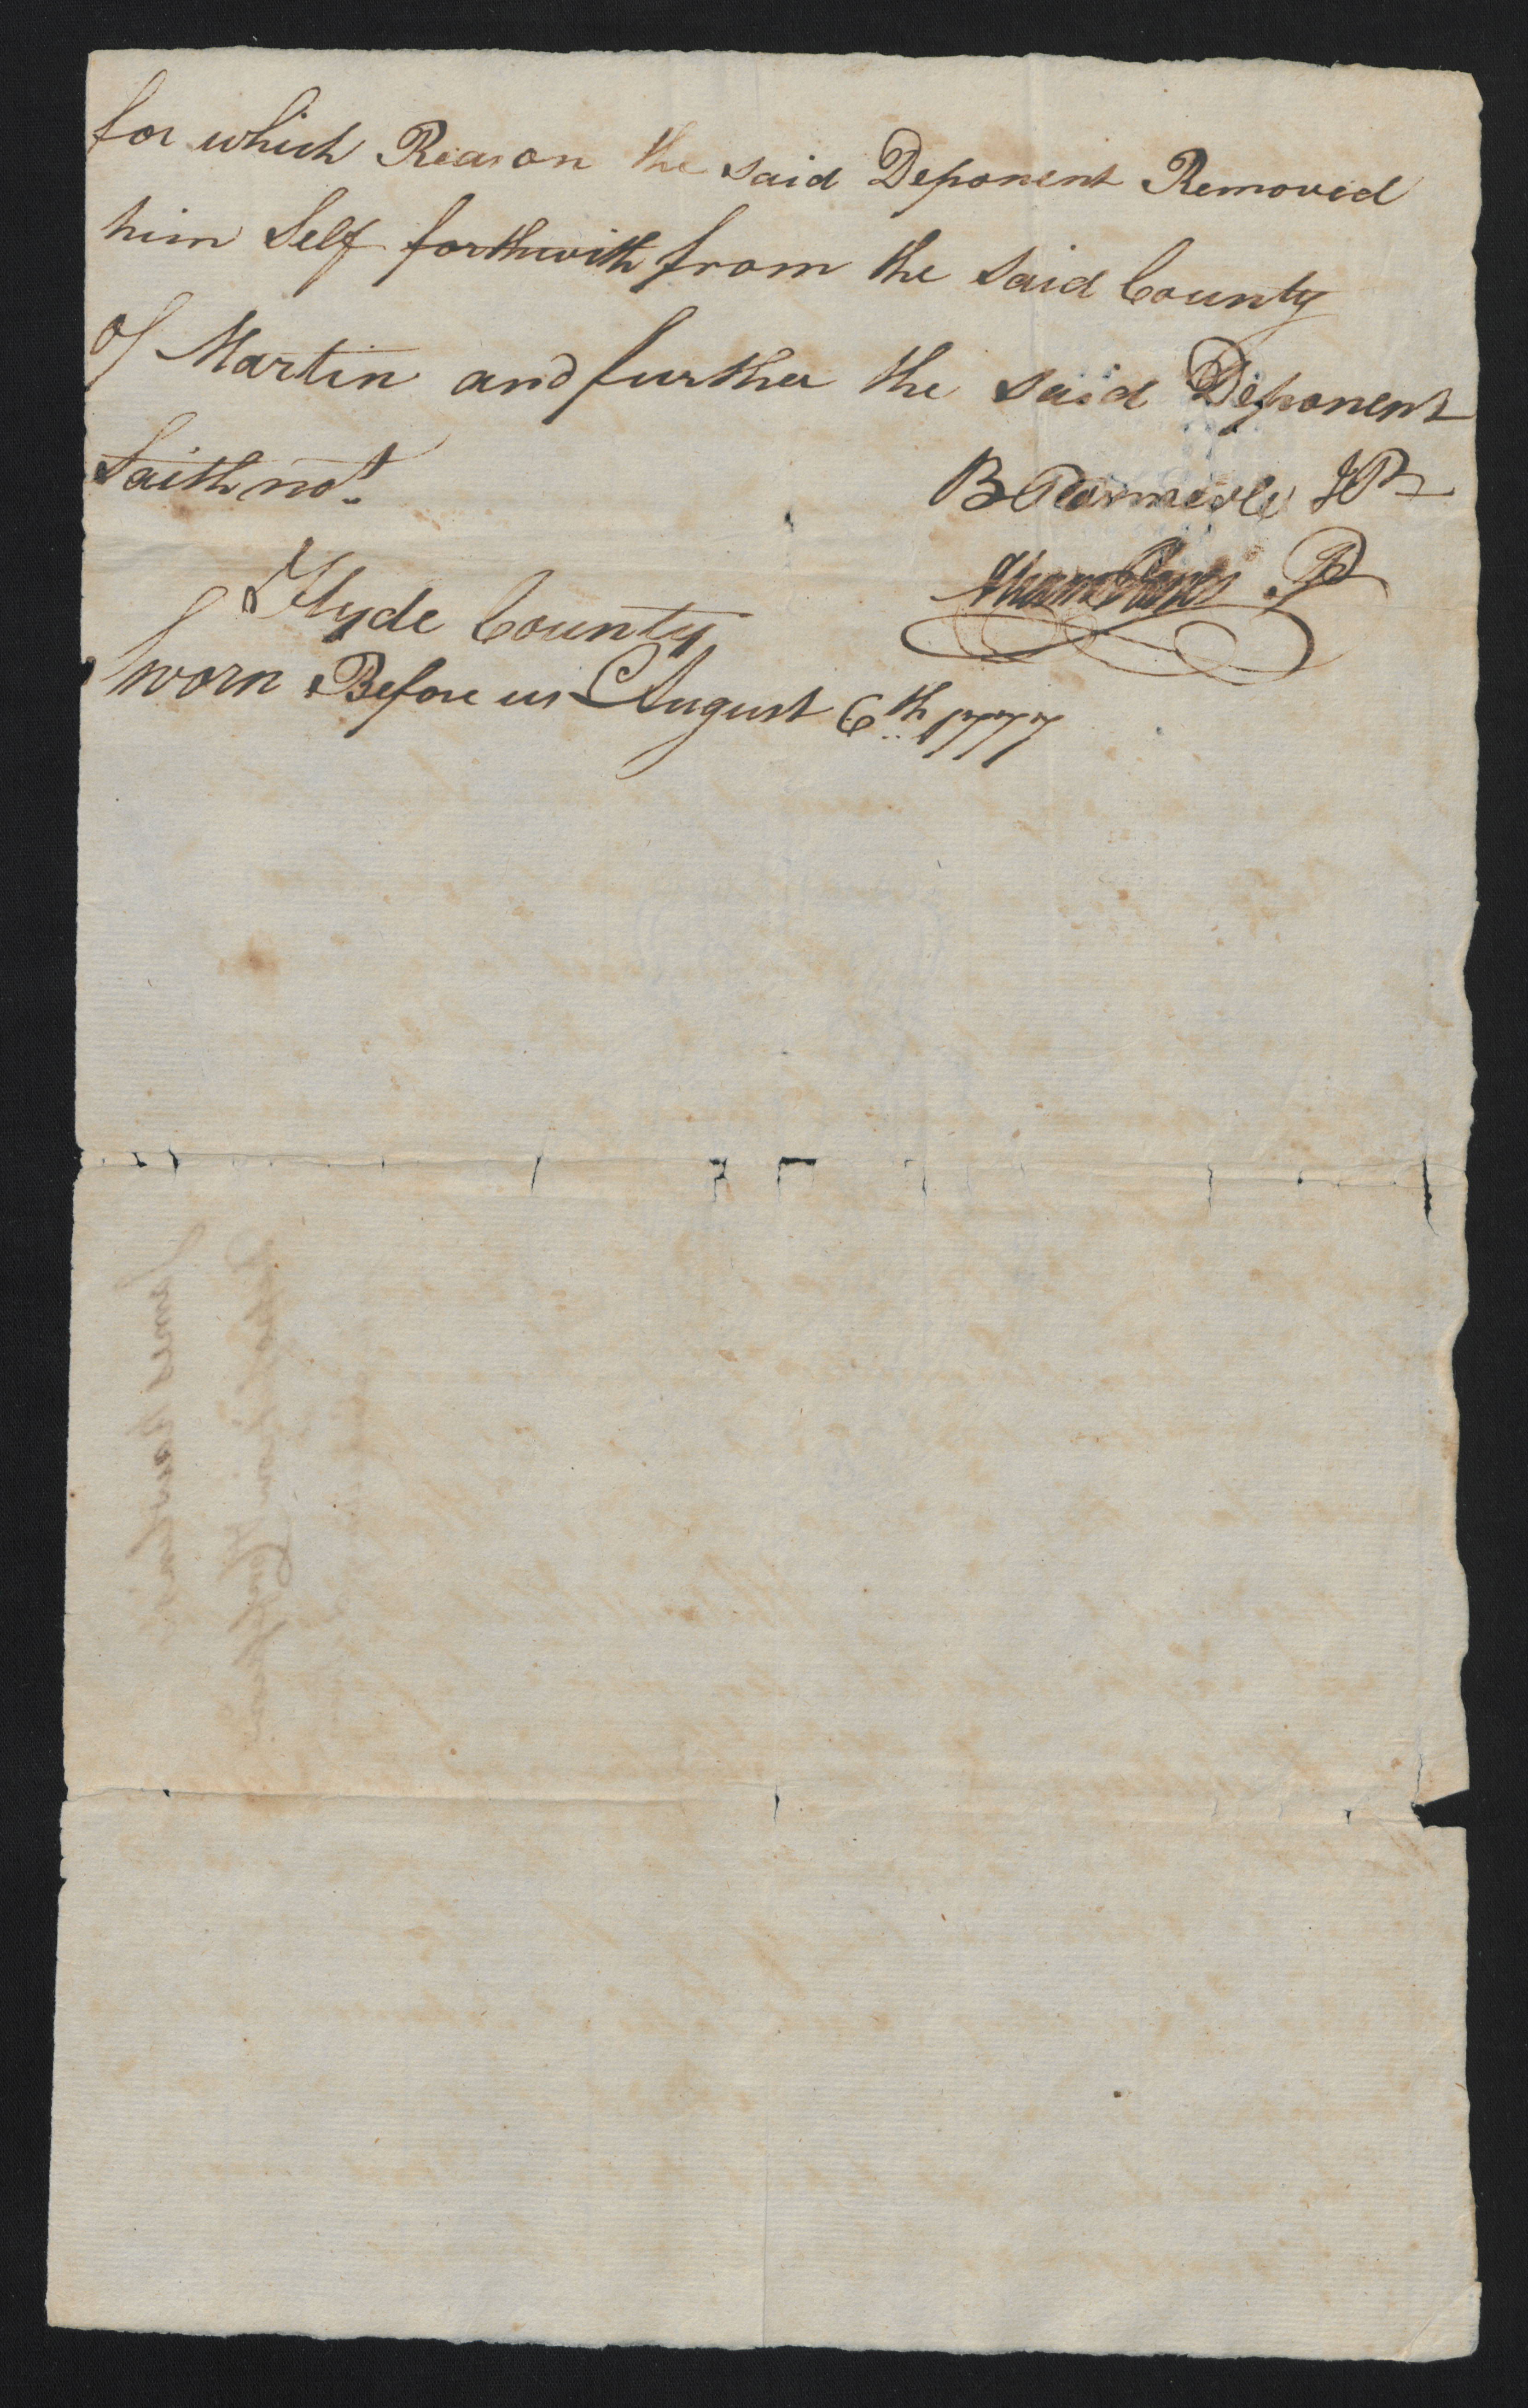 Deposition of James Rawlings, 6 August 1777, page 3